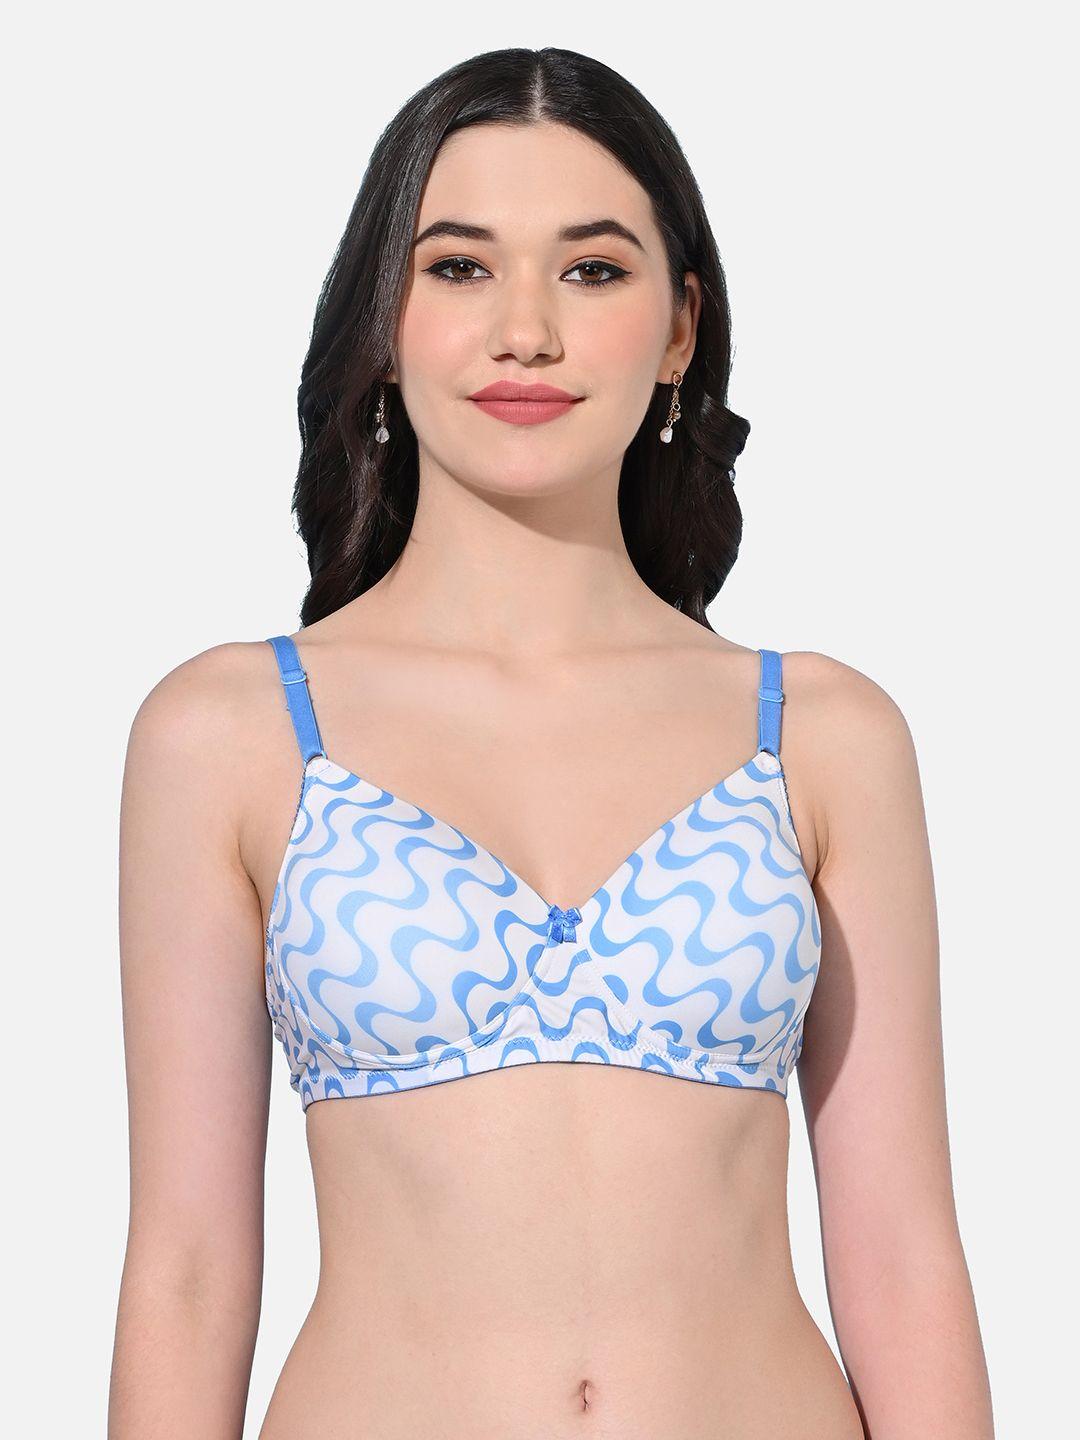 fims printed non-wired full coverage seamless everyday bra with all day comfort